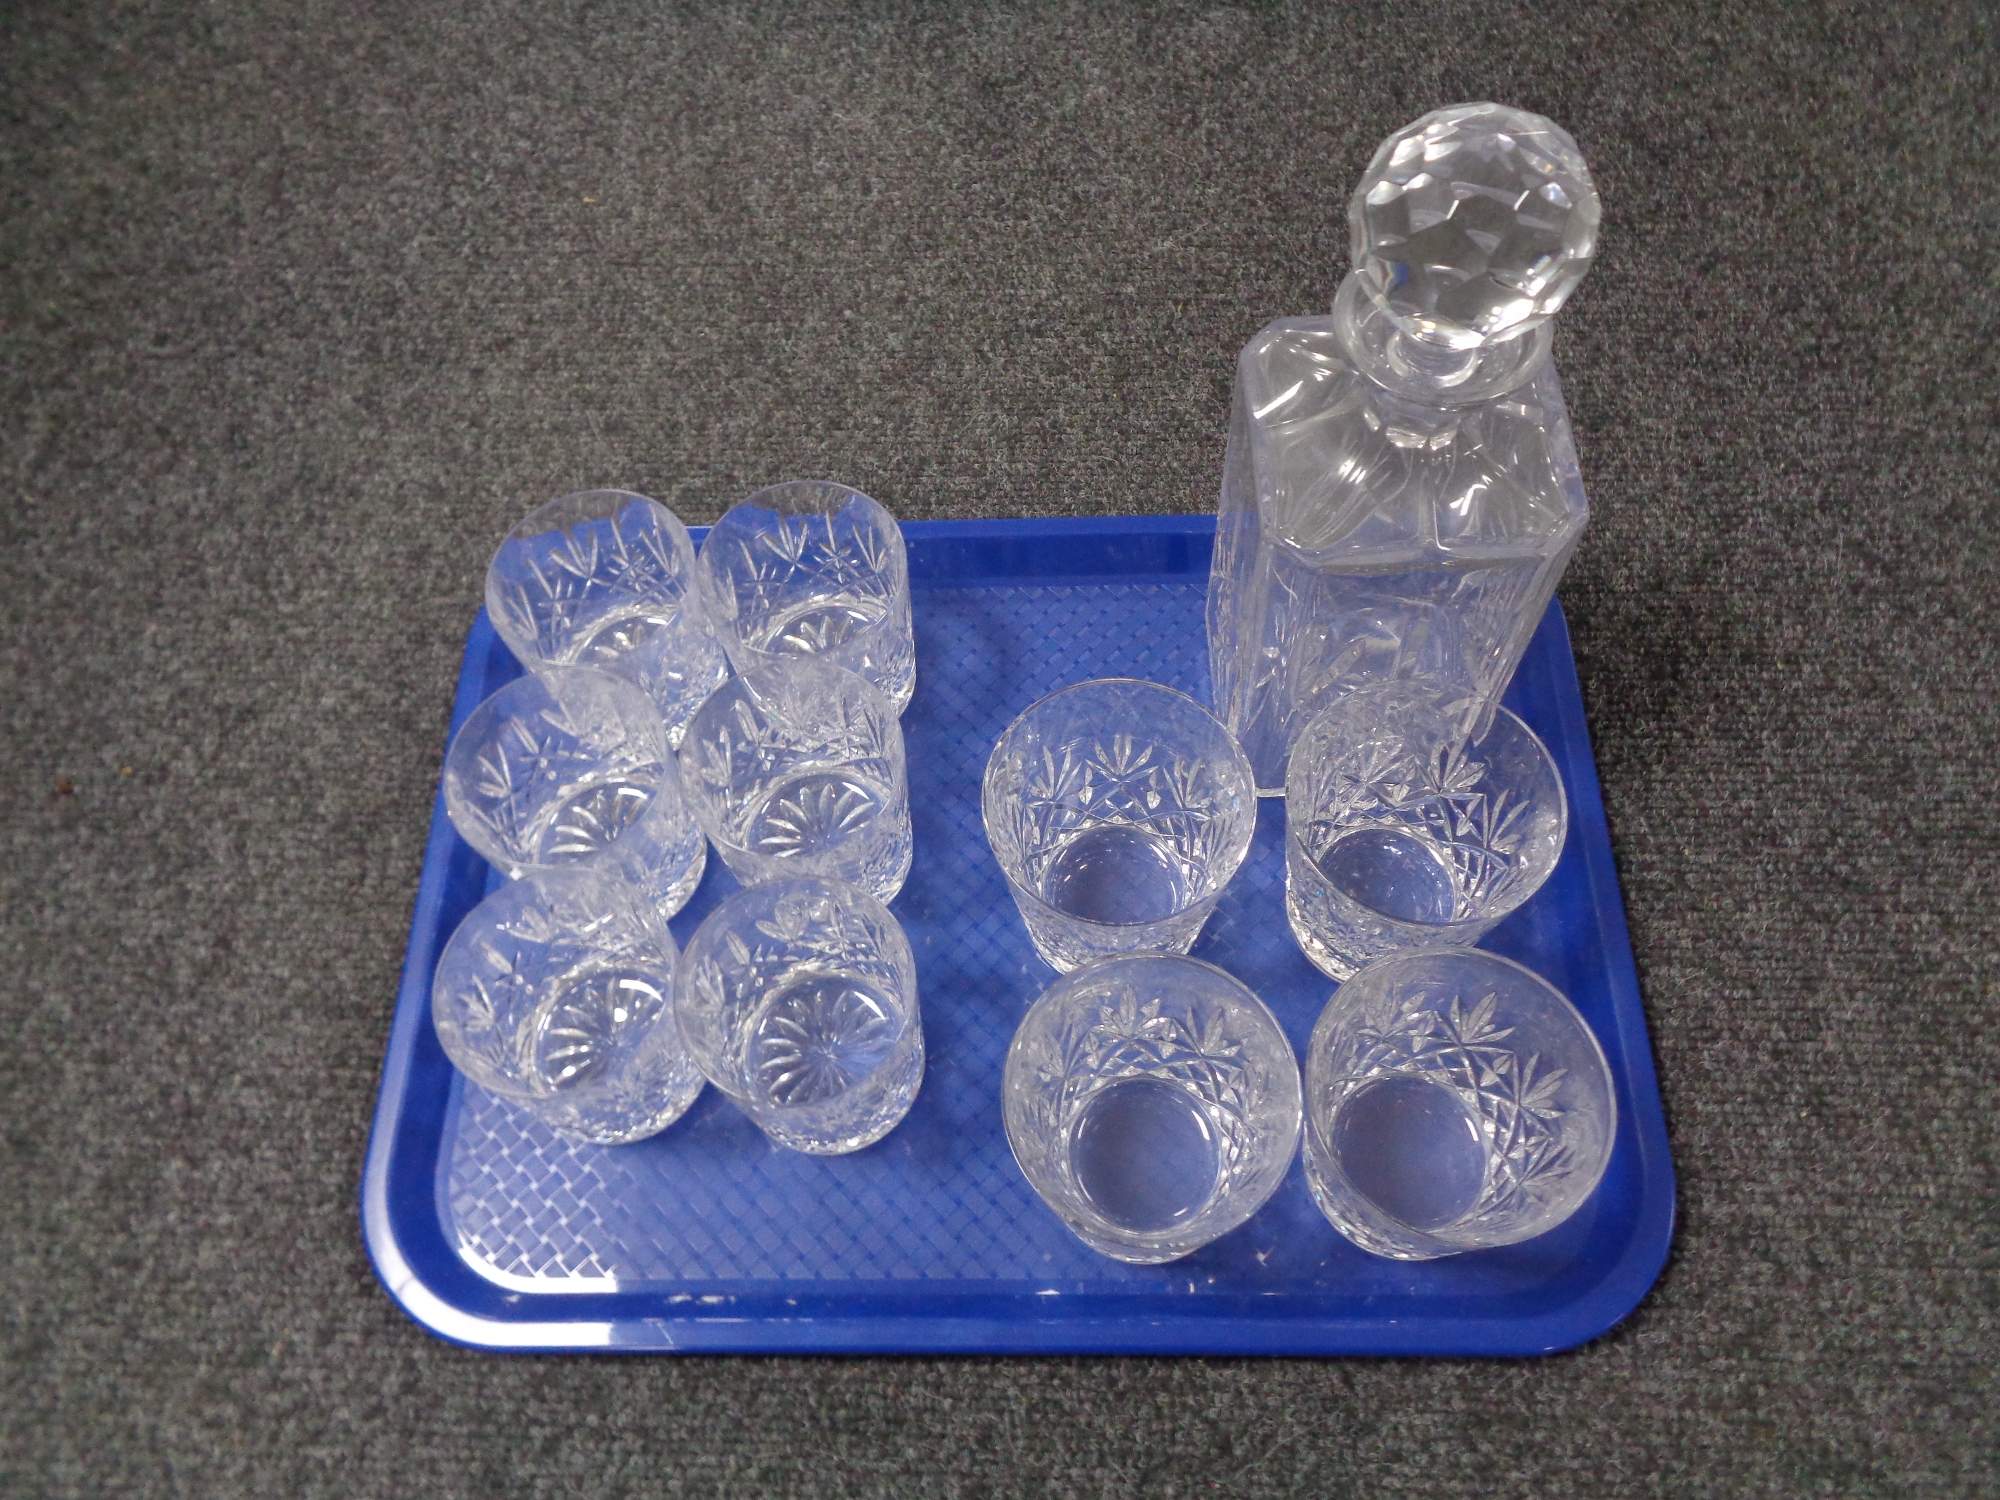 A tray of crystal decanter and glass.